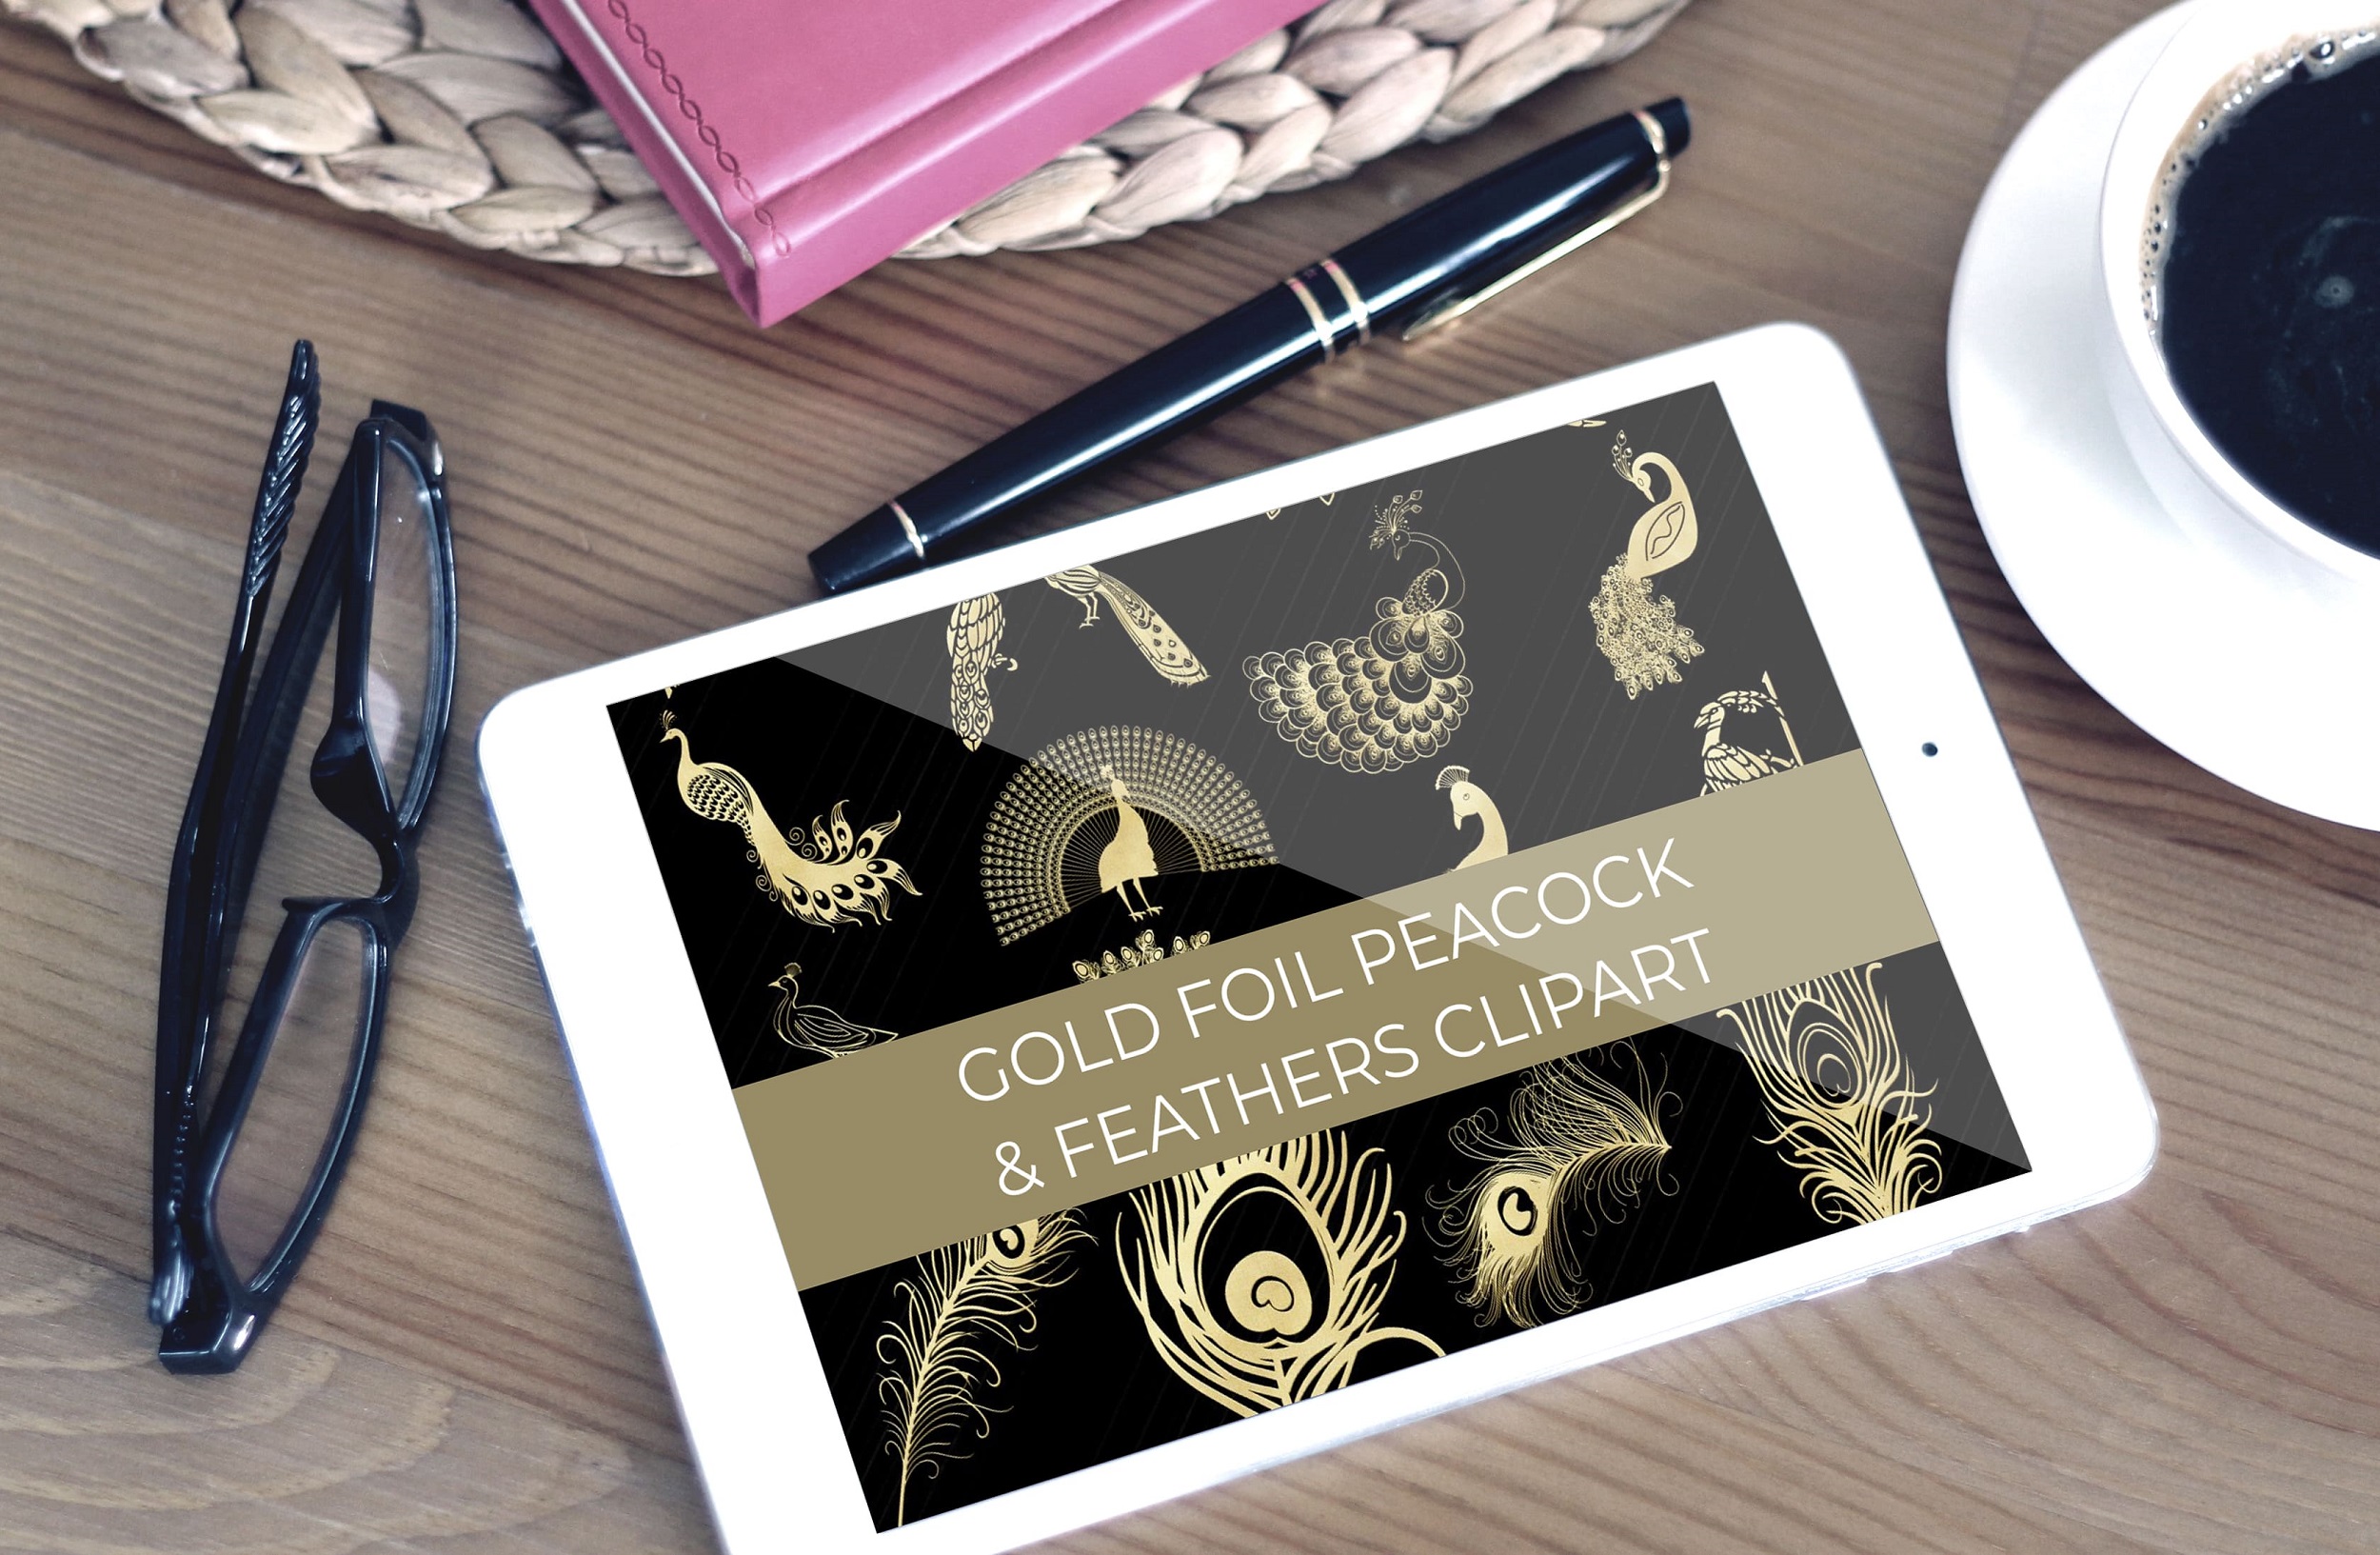 gold foil peacock feathers clipart tablet mockup.